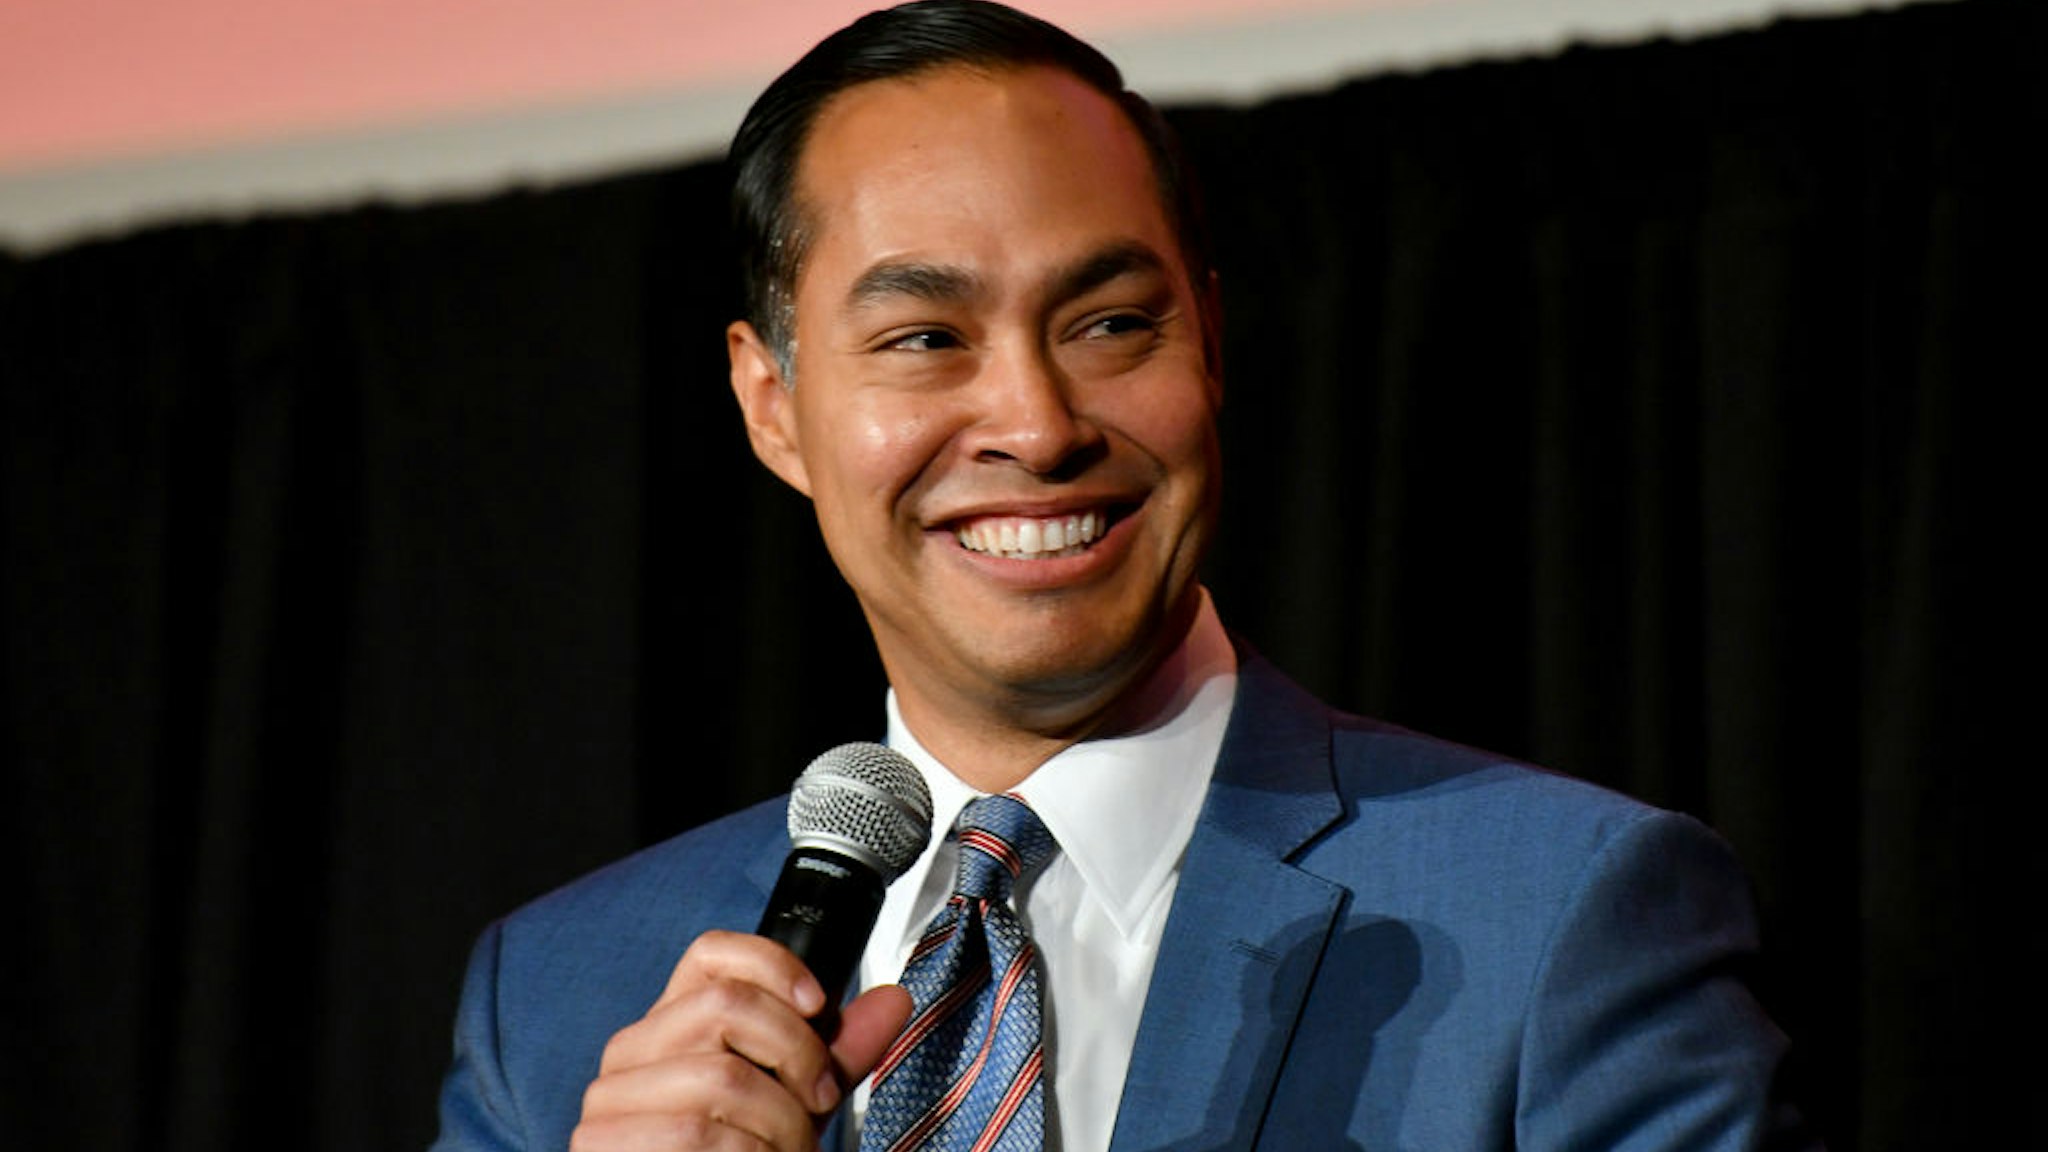 Julian Castro speaks on stage during the 2019 New Yorker Festival